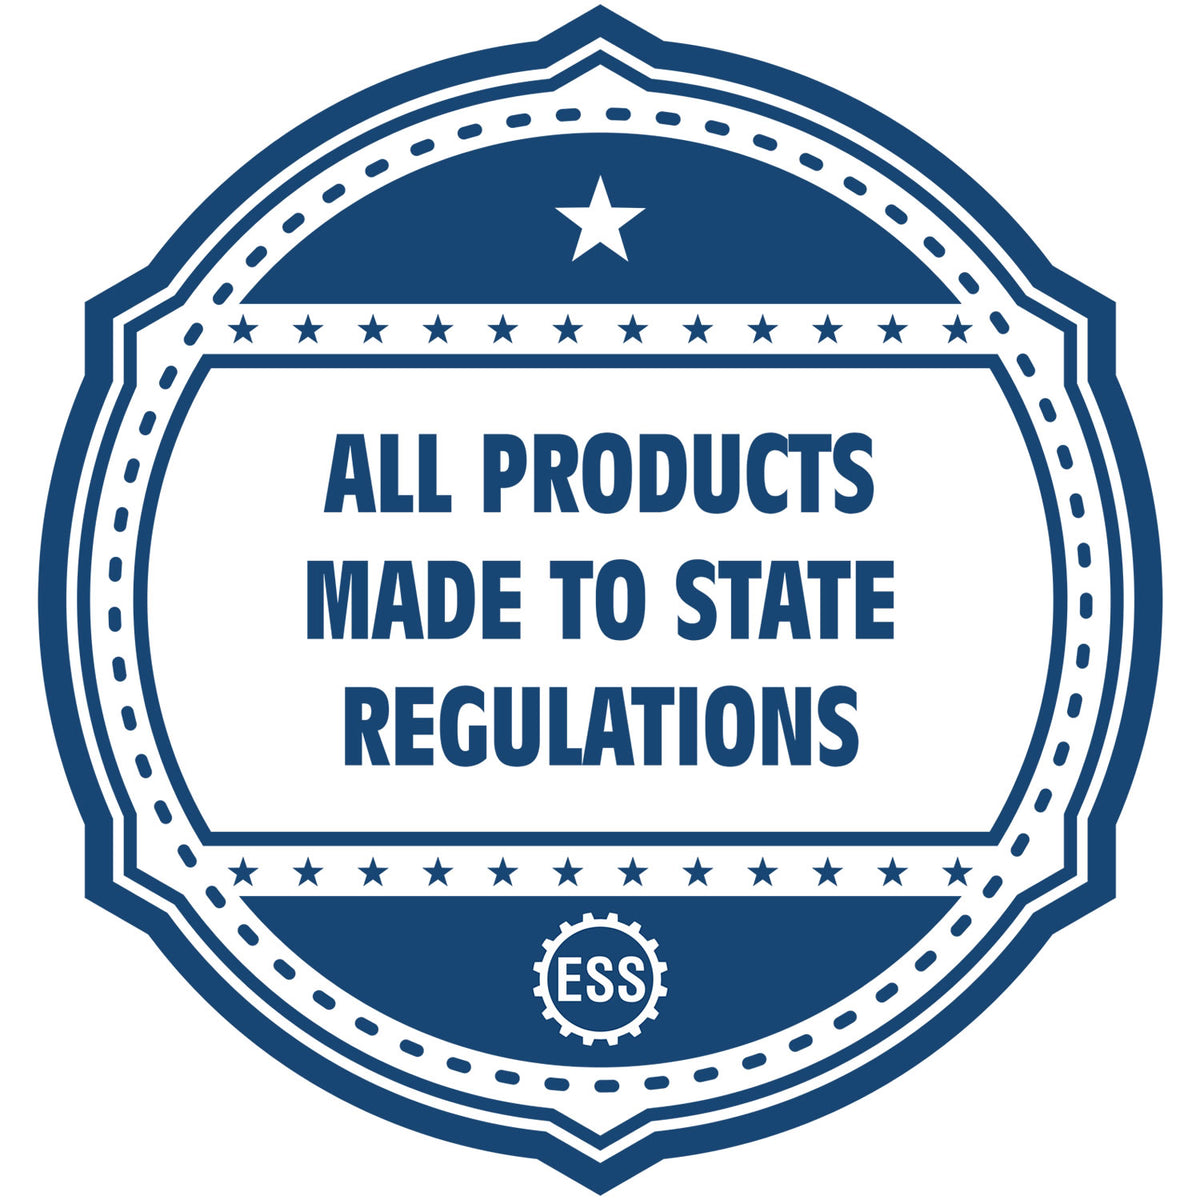 An icon or badge element for the Heavy Duty Cast Iron Massachusetts Land Surveyor Seal Embosser showing that this product is made in compliance with state regulations.